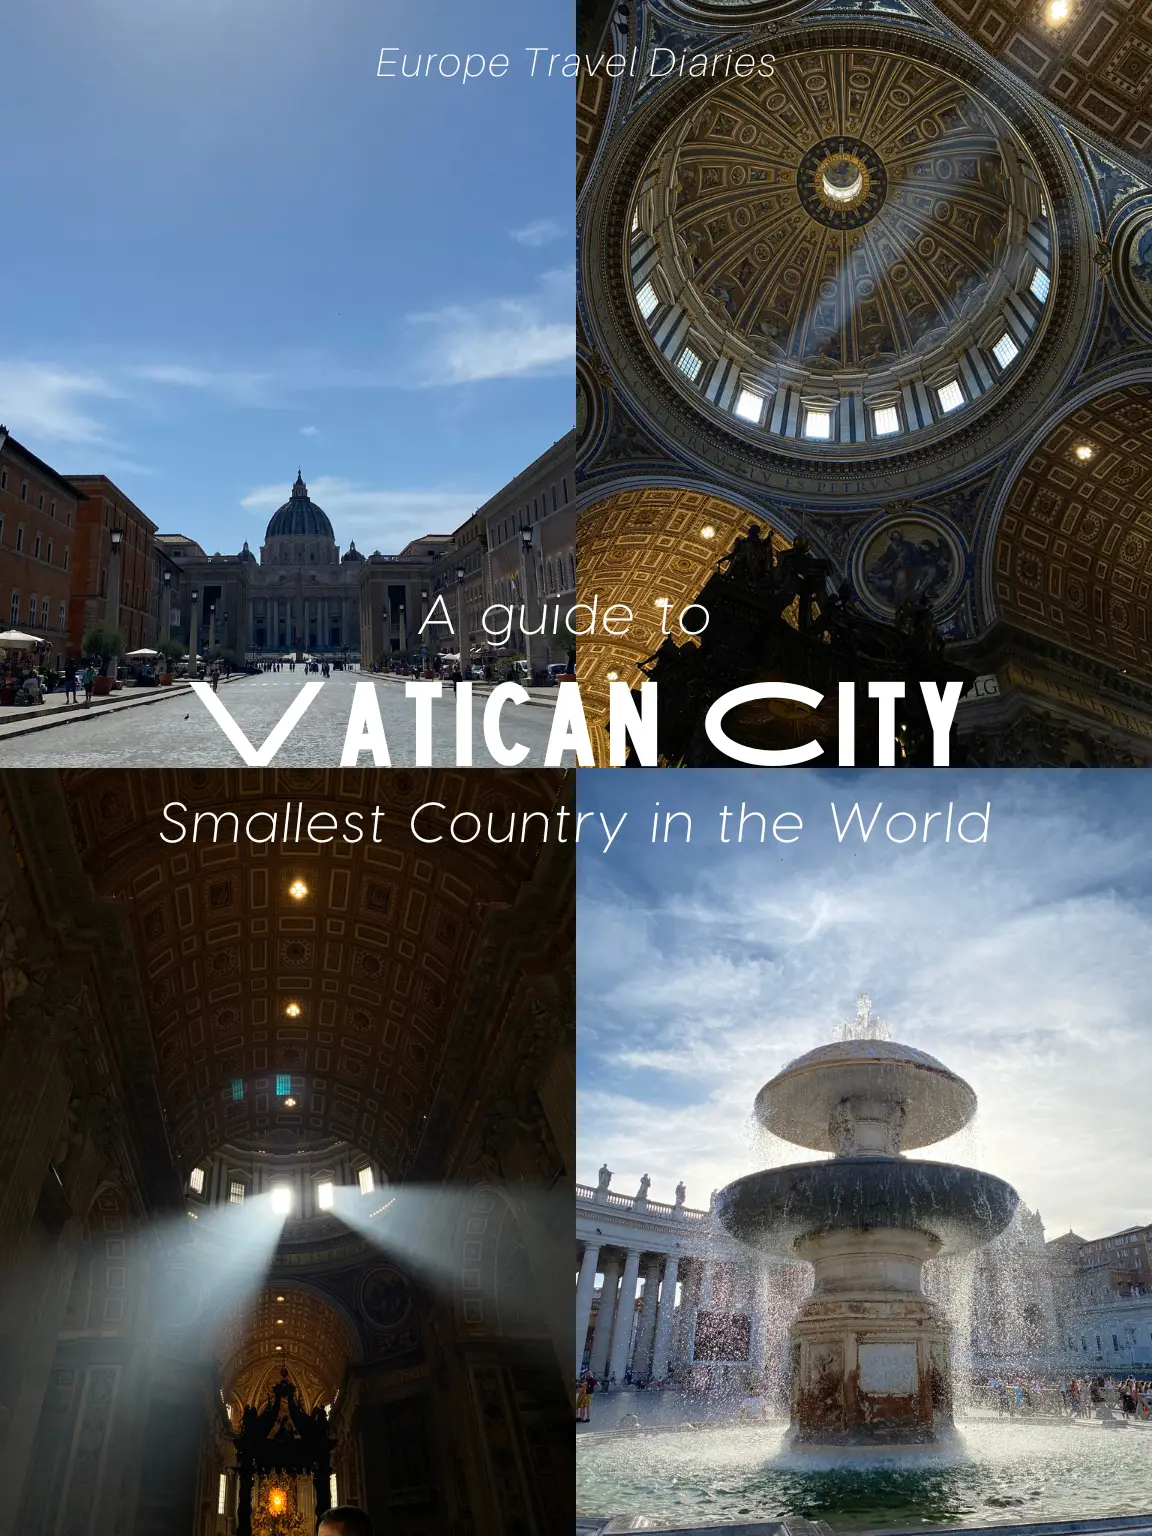 A Guide to Vatican City, the Smallest City in the World